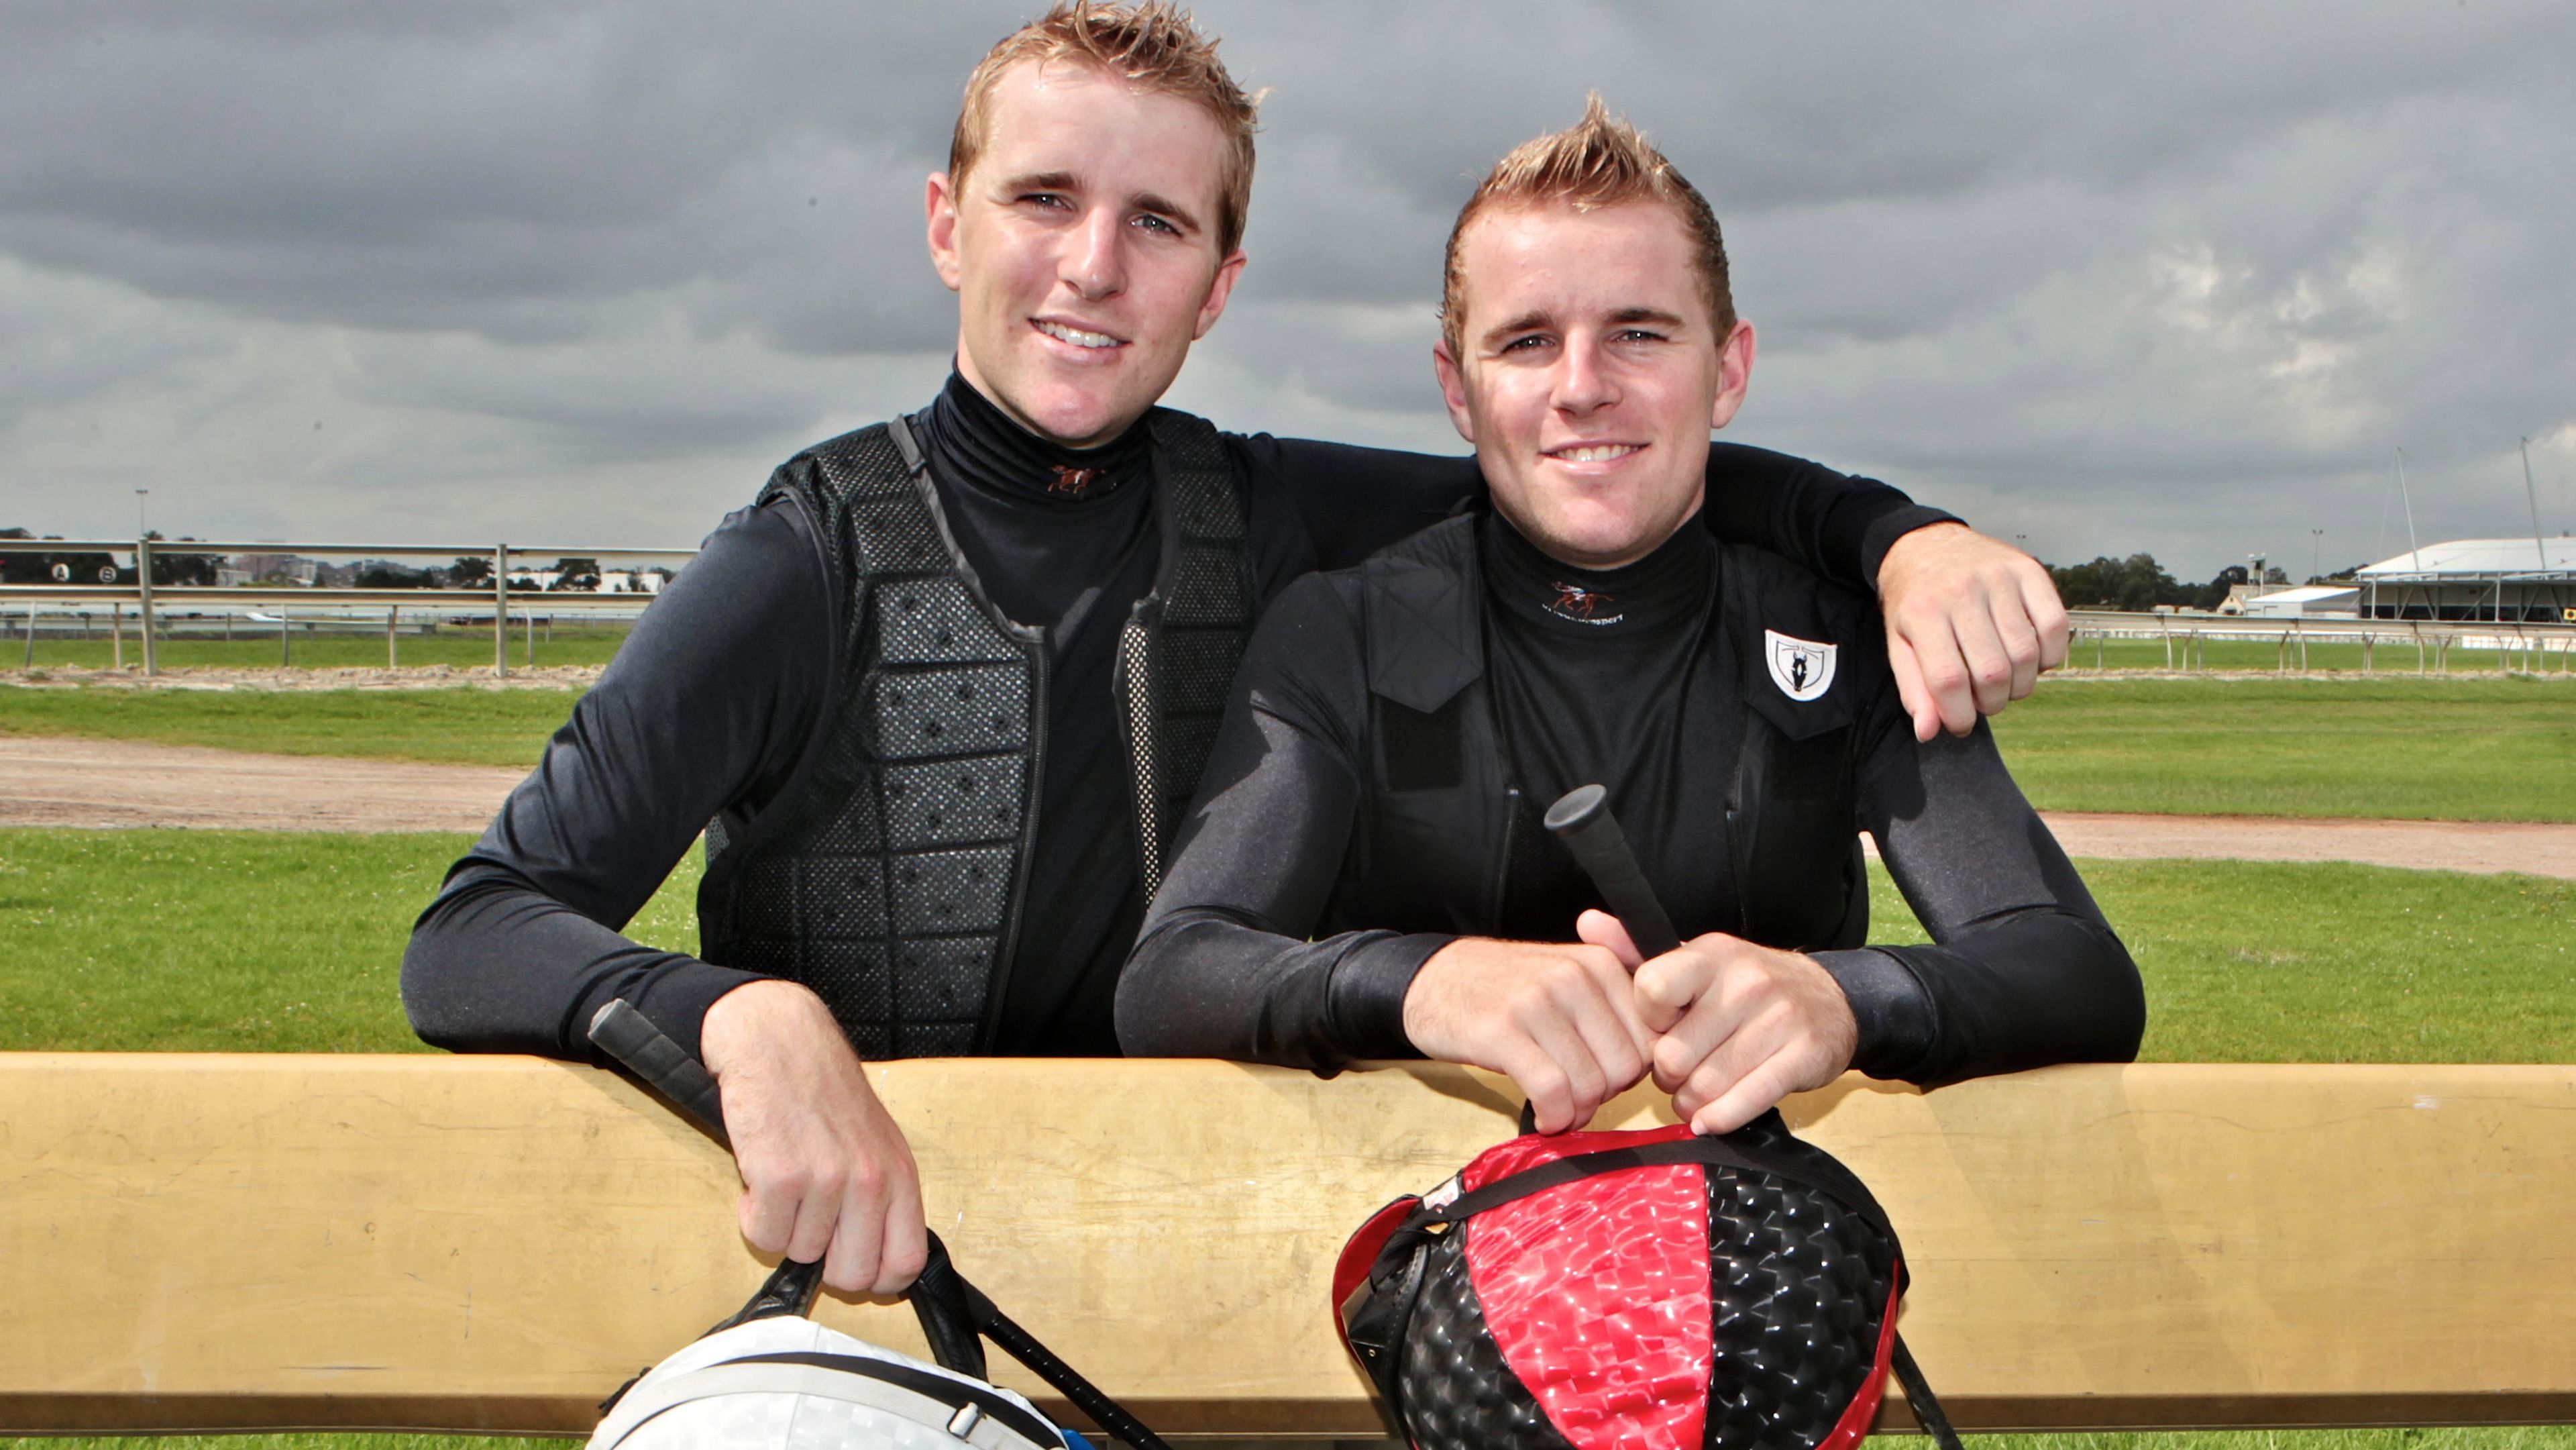 Twins Nathan Berry and Tommy Berry in 2012, before Nathan&#x27;s tragic death.